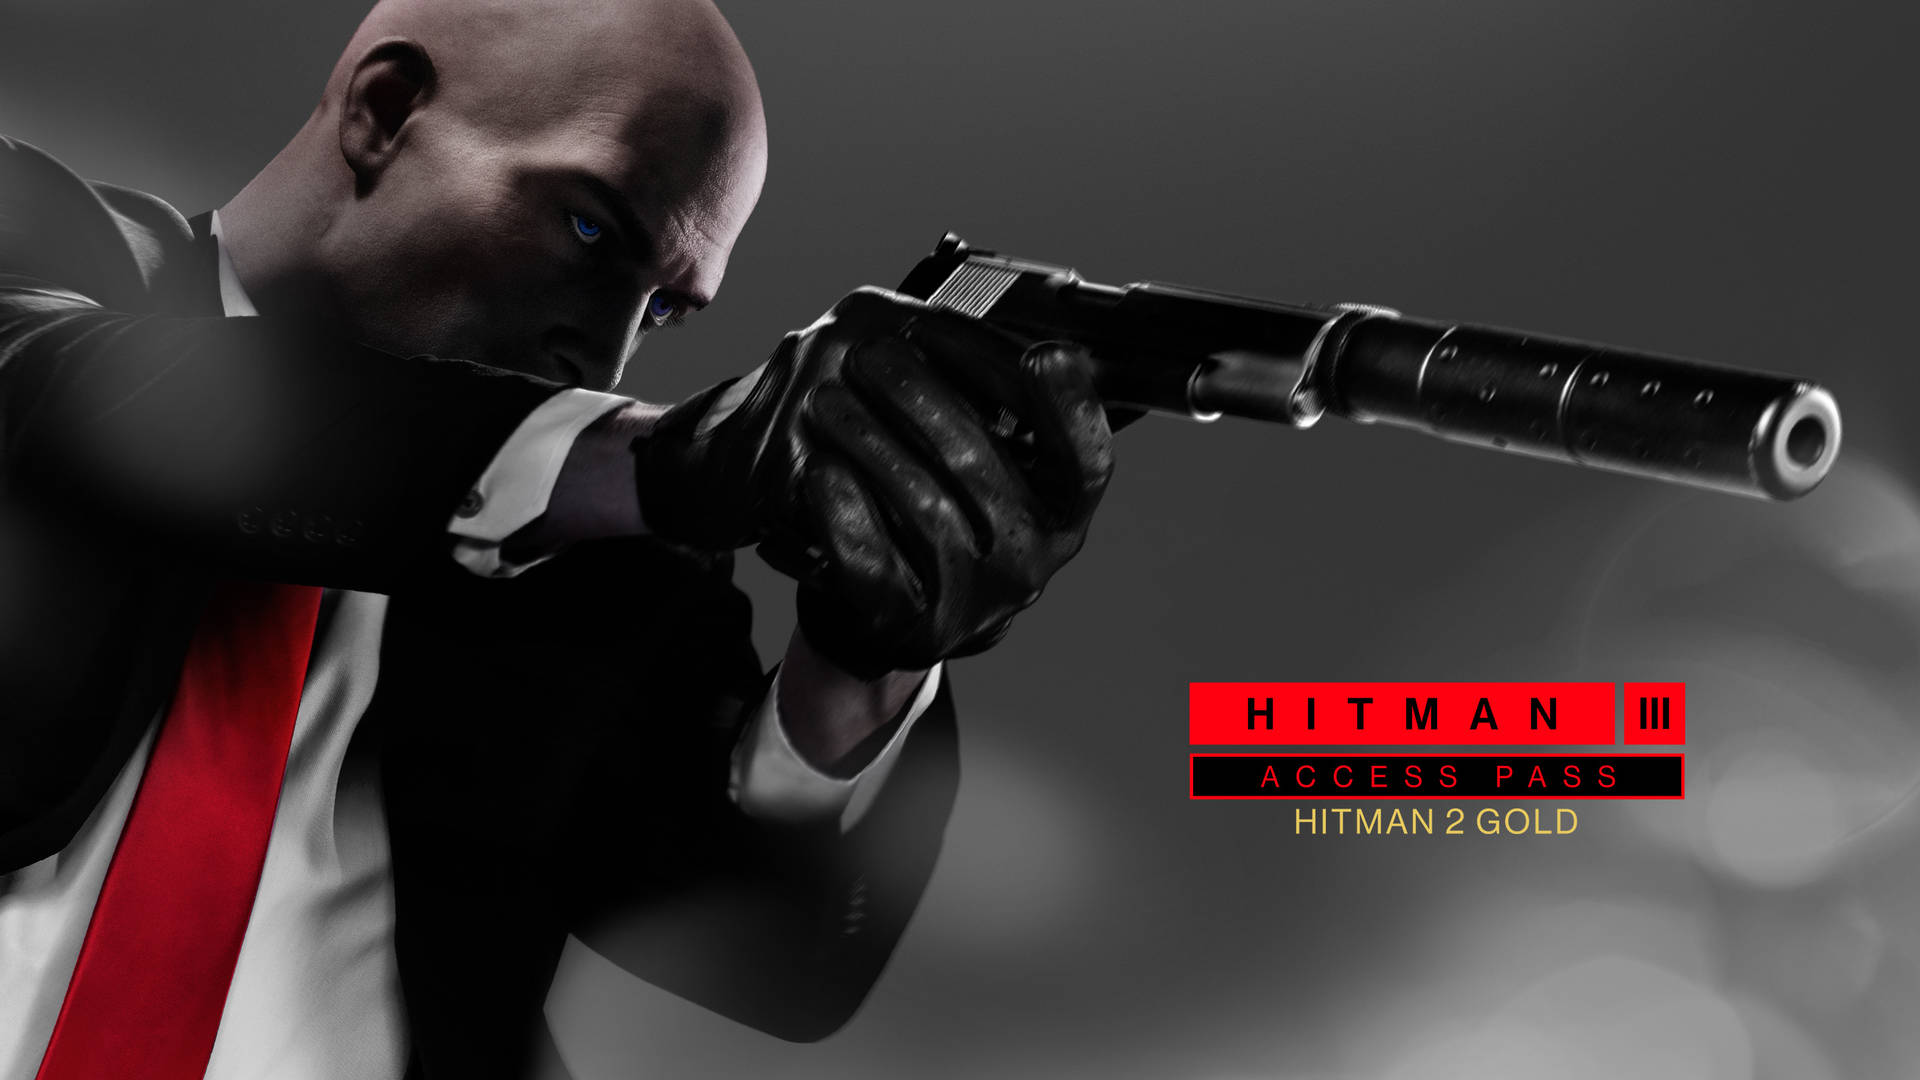 Stealth gaming action with Hitman 2 red access pass. Wallpaper